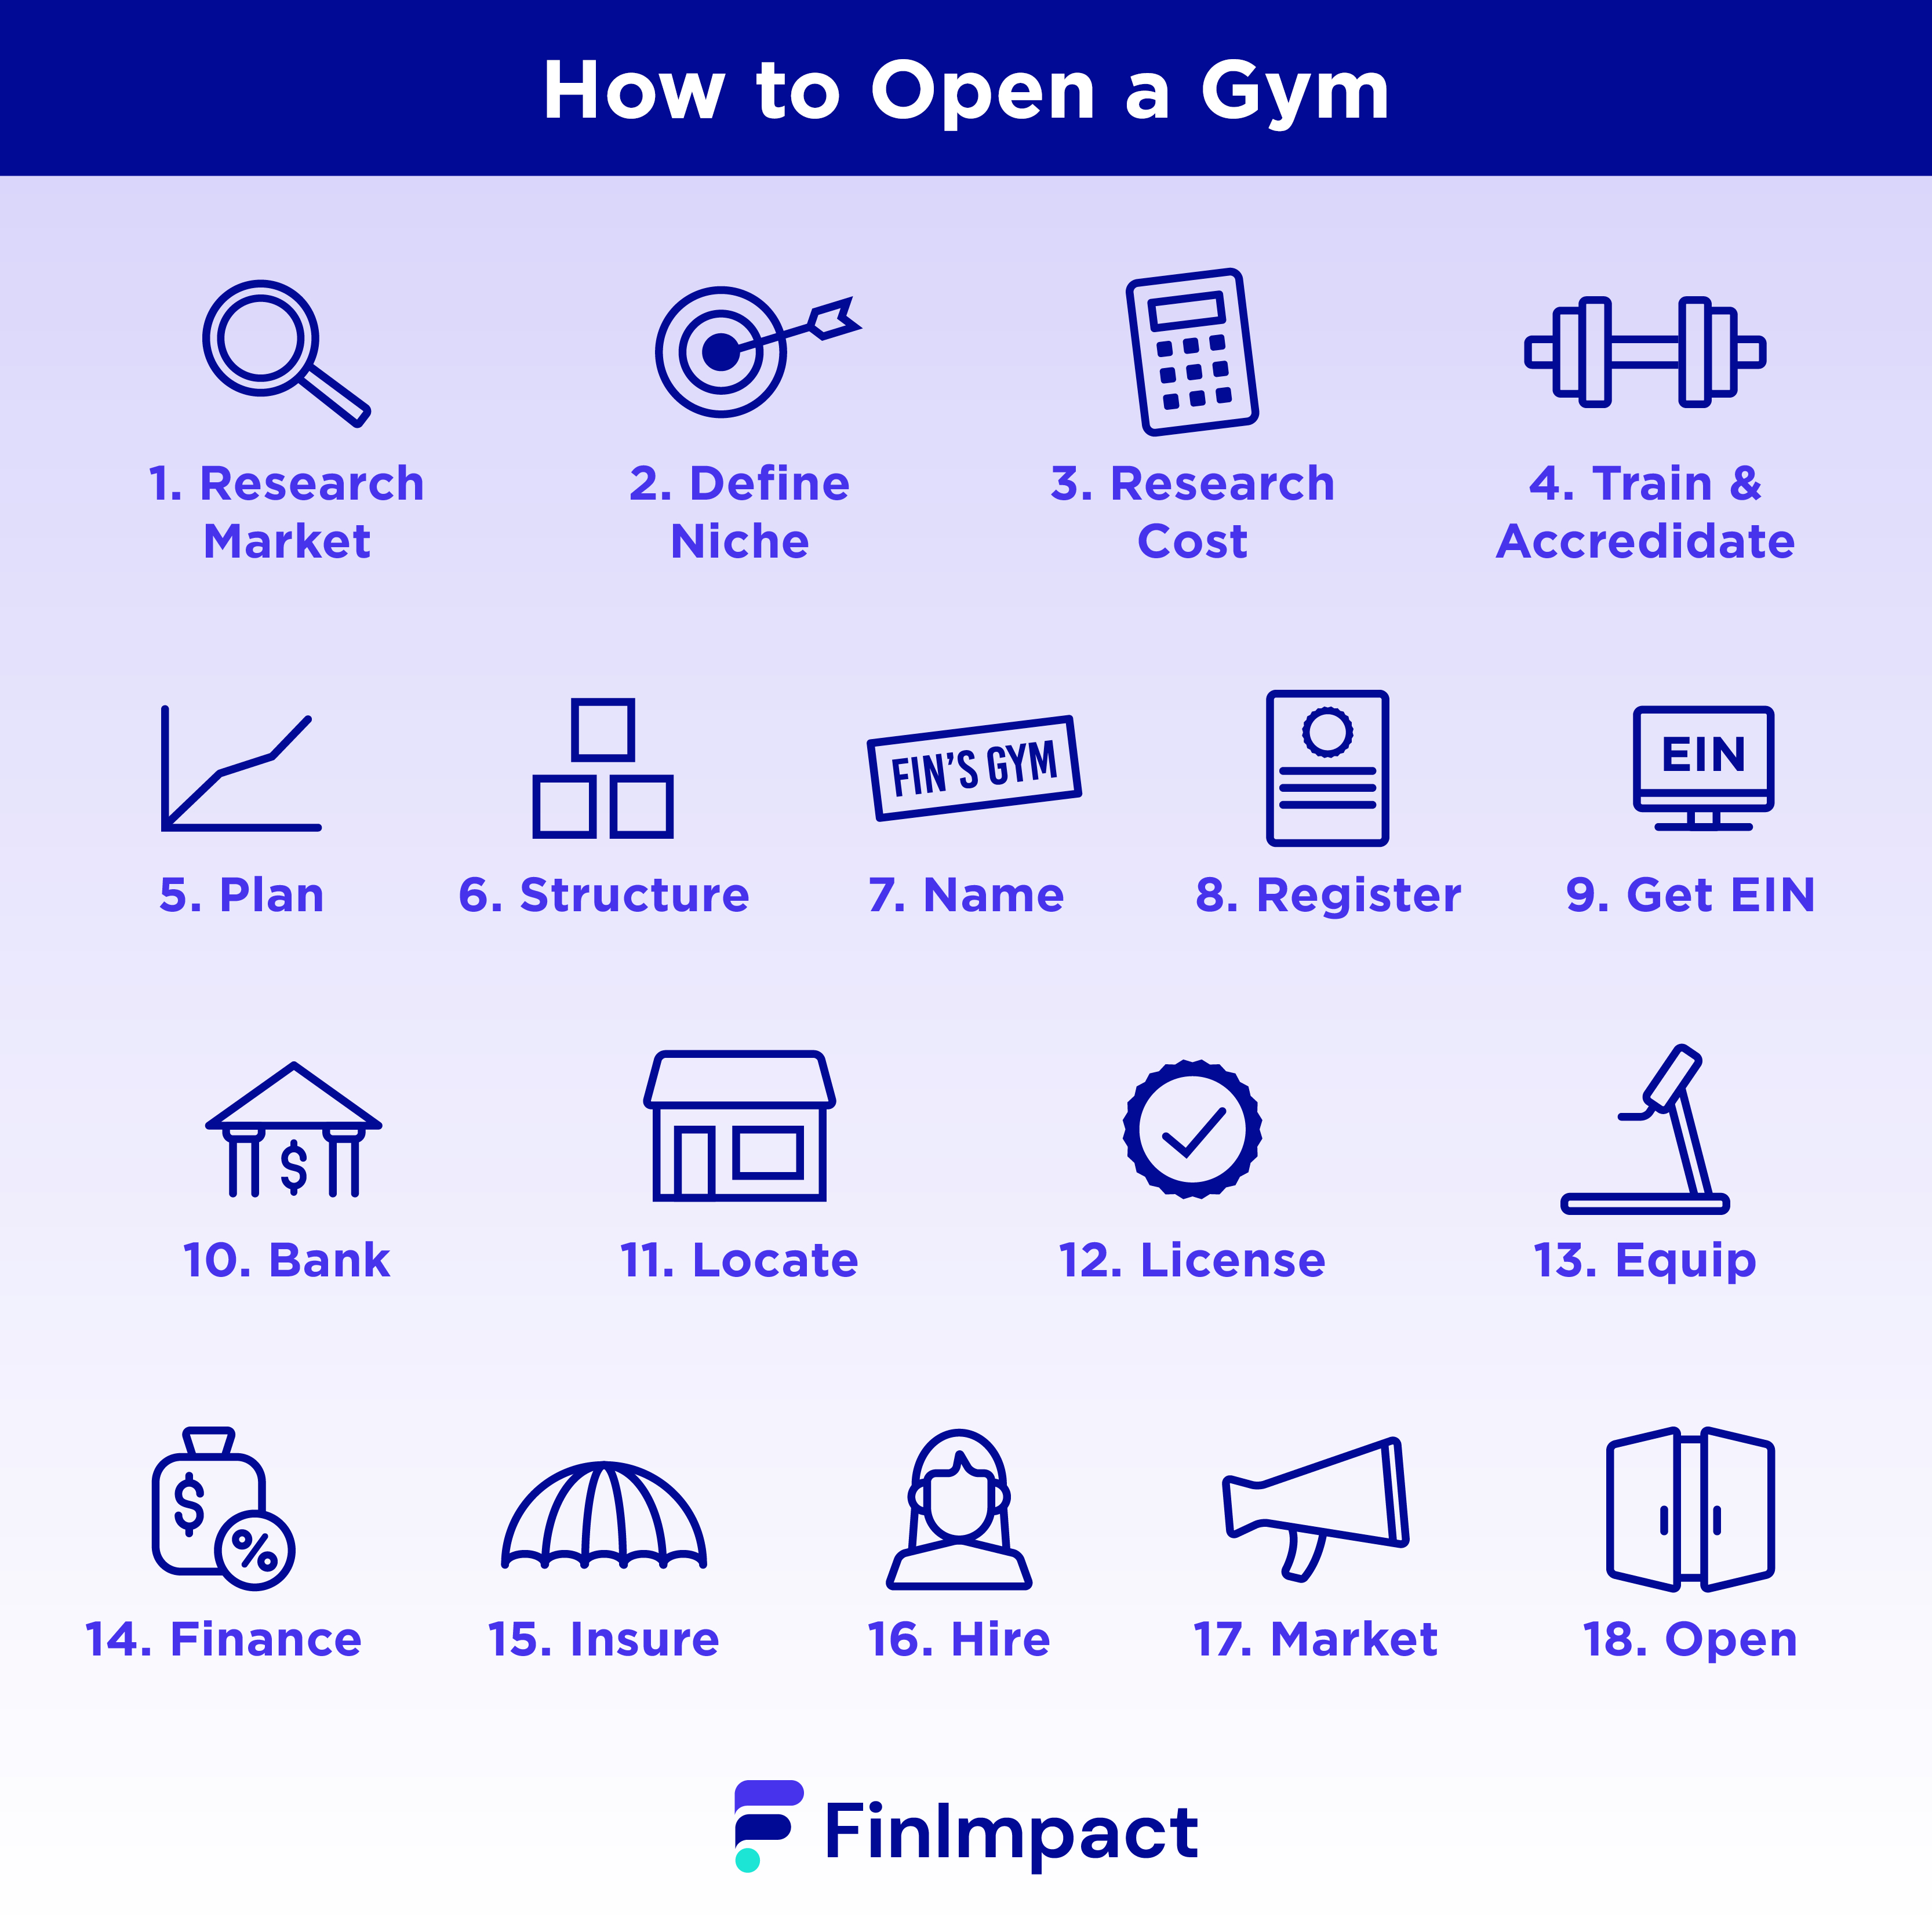 How to Open a Gym